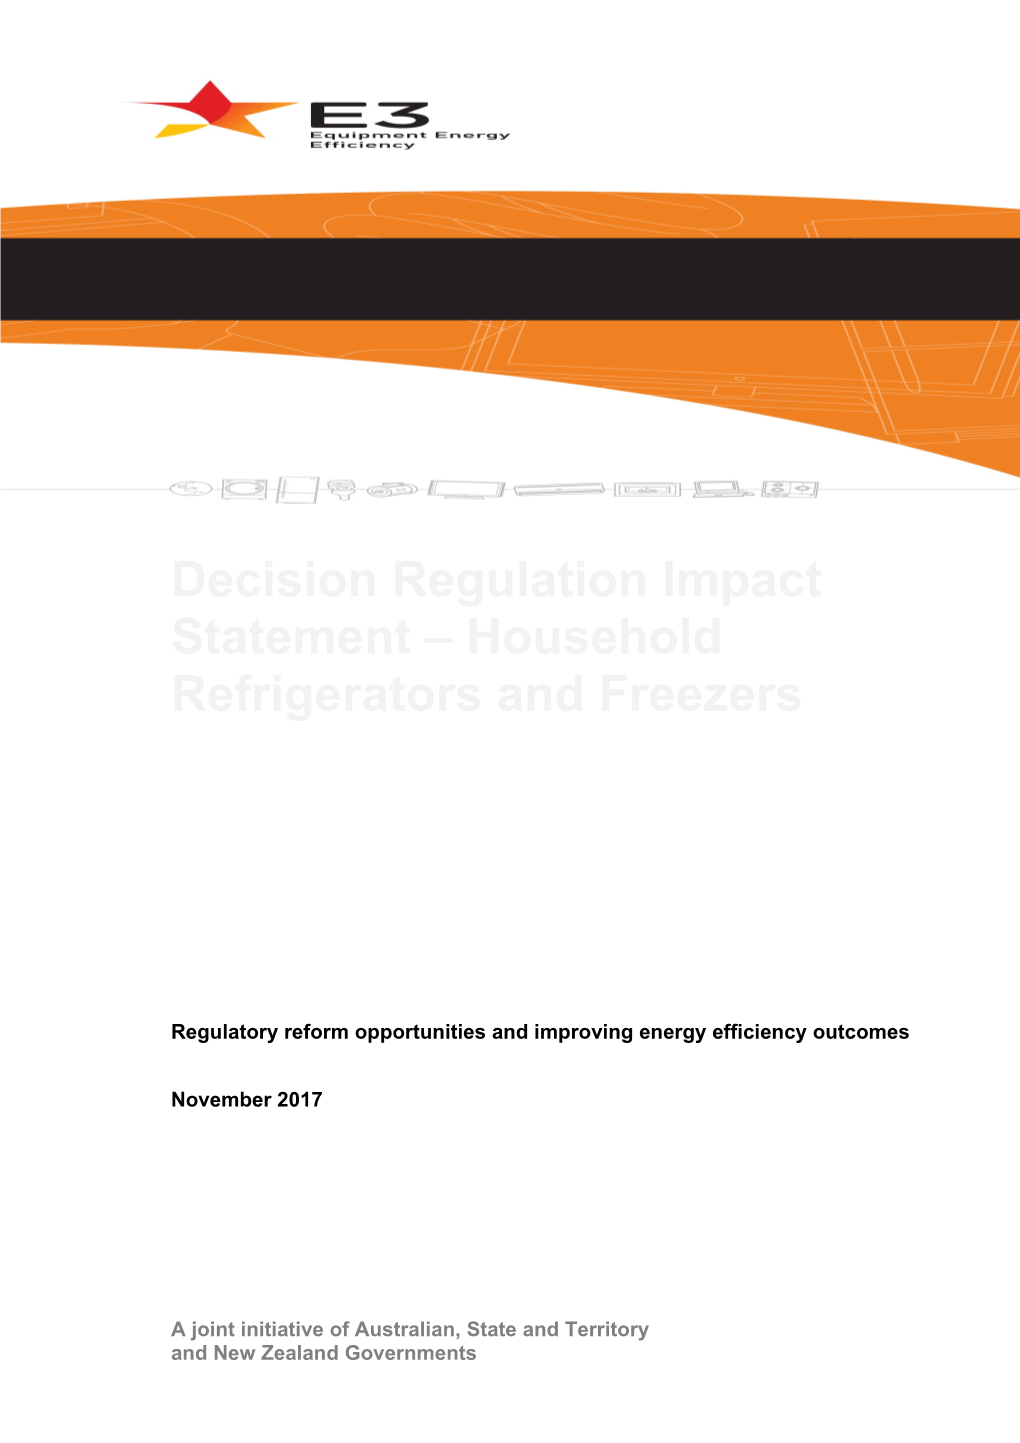 Regulatory Reform Opportunities and Improving Energy Efficiency Outcomes